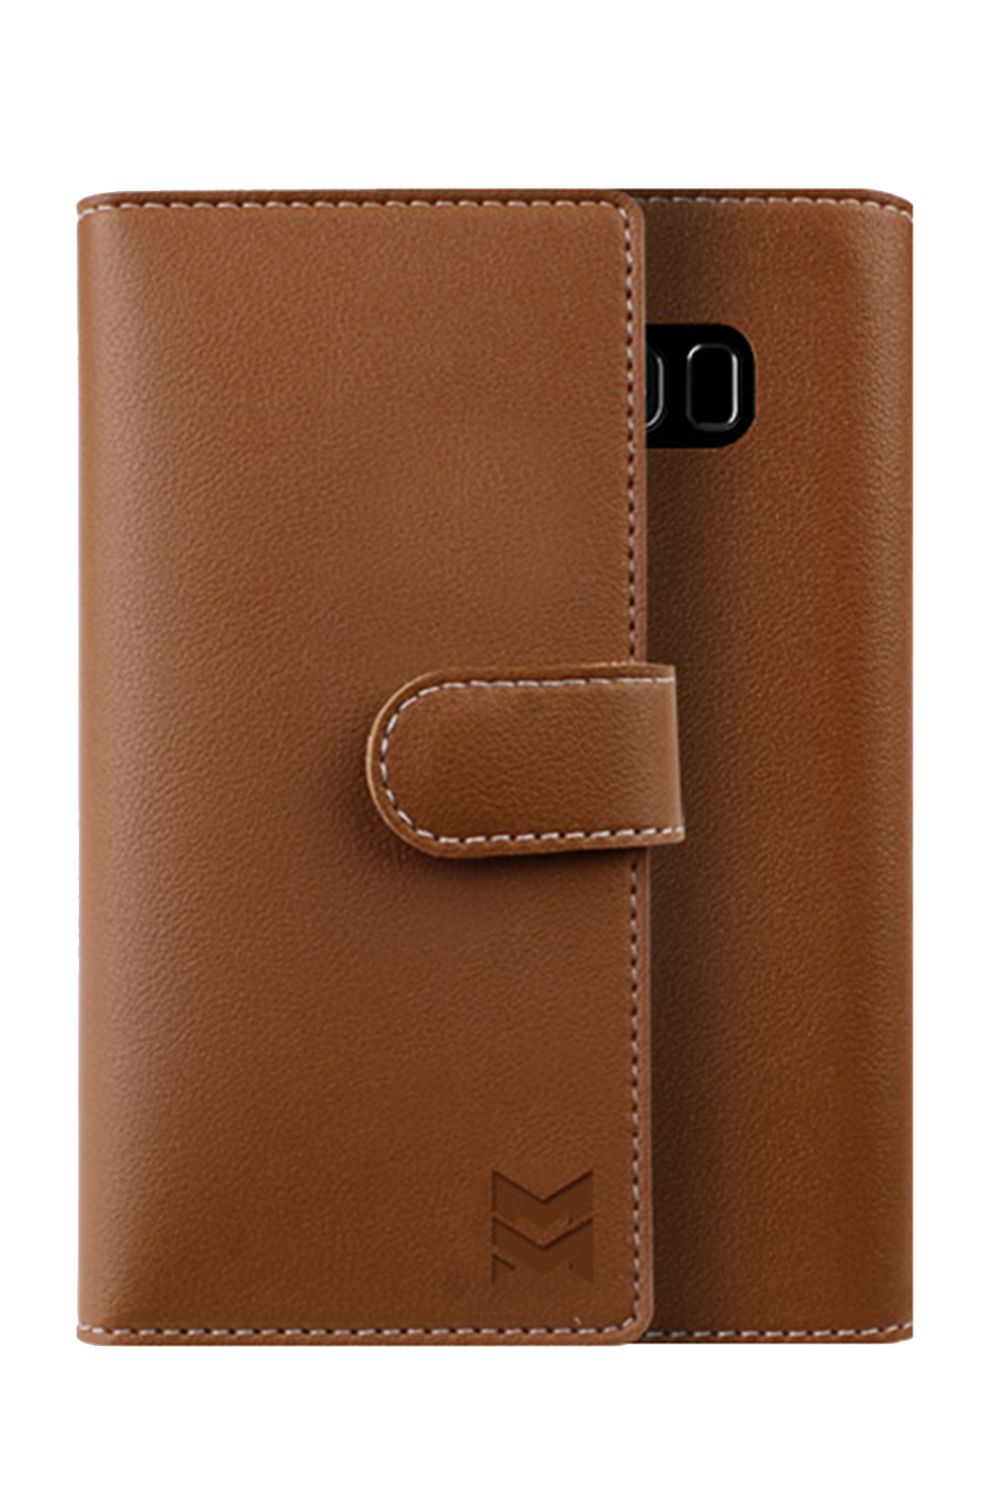 iPhone 11 Pro Maximo Vintage Edition Daily Wallet Case - Brown